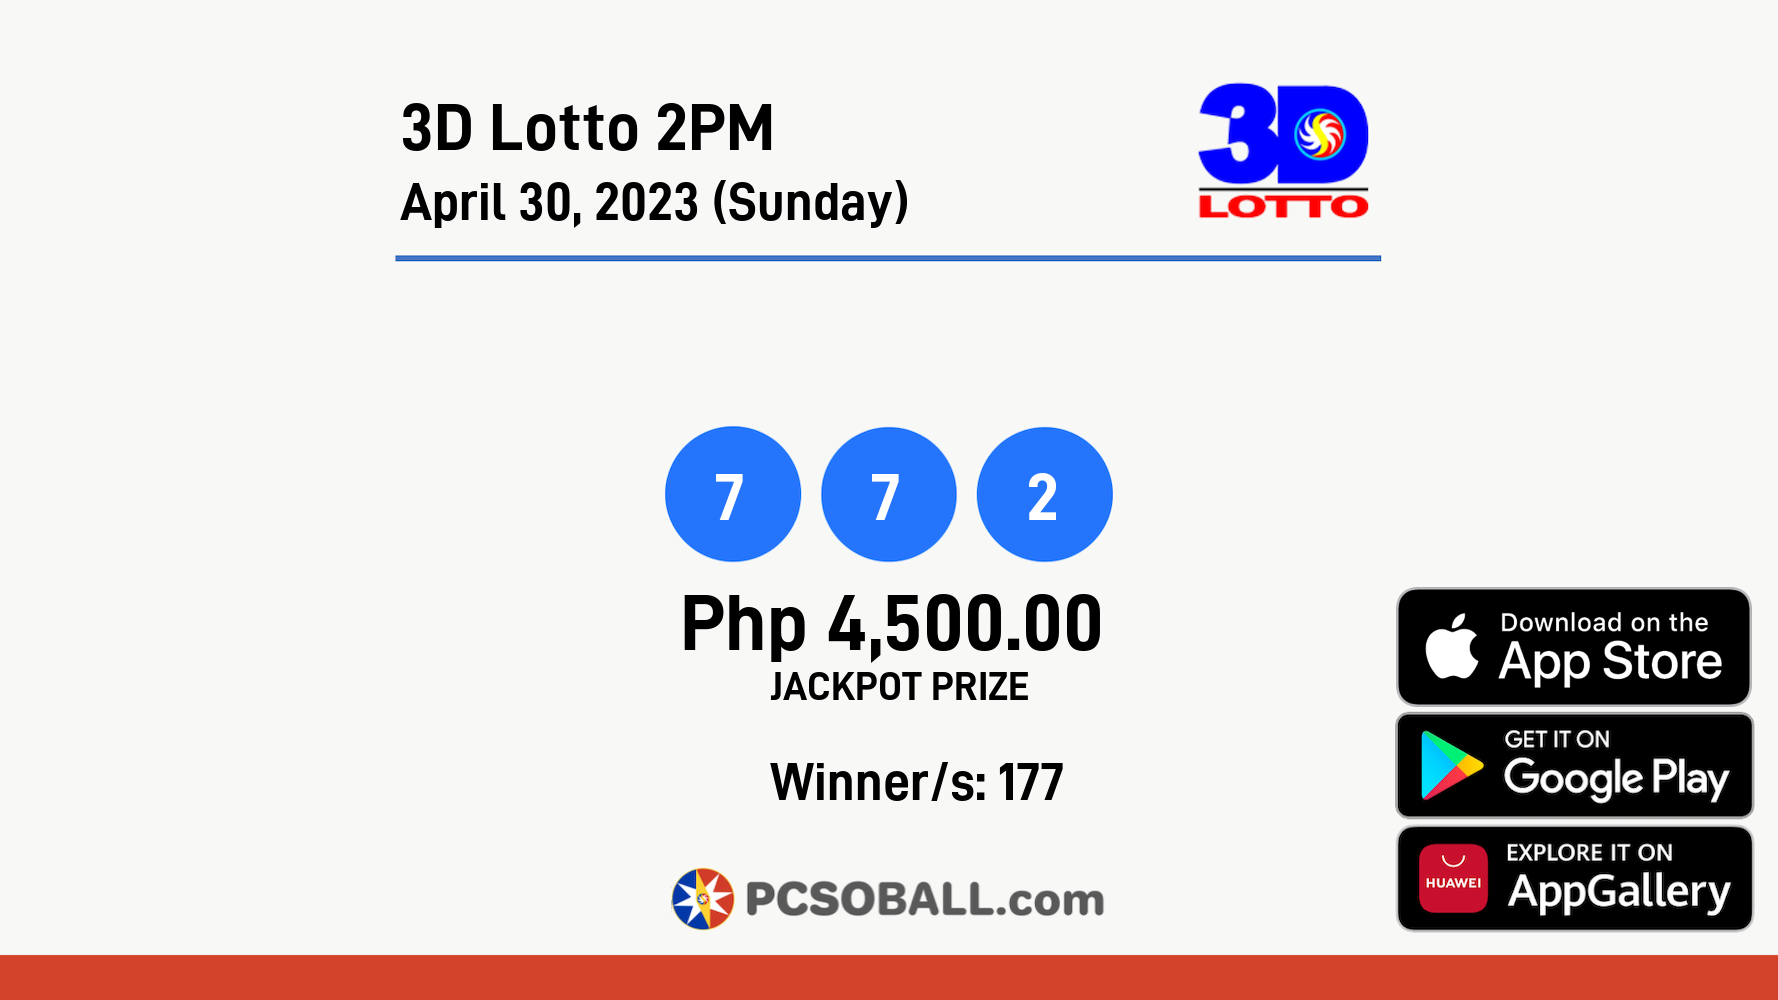 3D Lotto 2PM April 30, 2023 (Sunday) Result